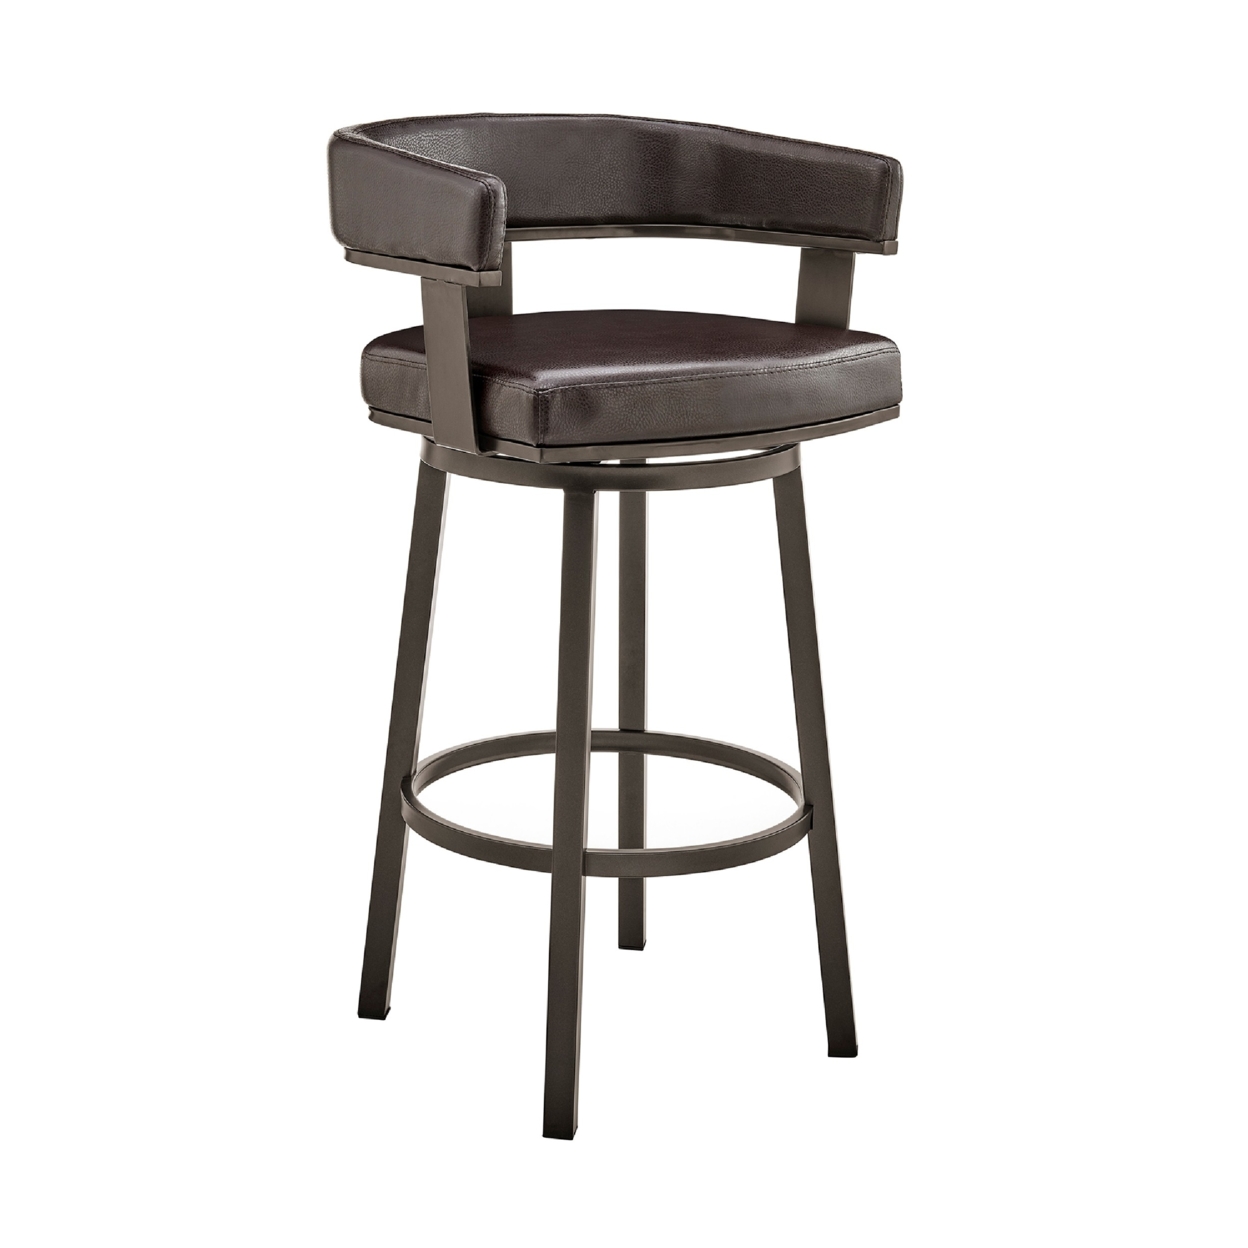 Swivel Counter Barstool With Curved Open Back And Metal Legs, Dark Brown- Saltoro Sherpi